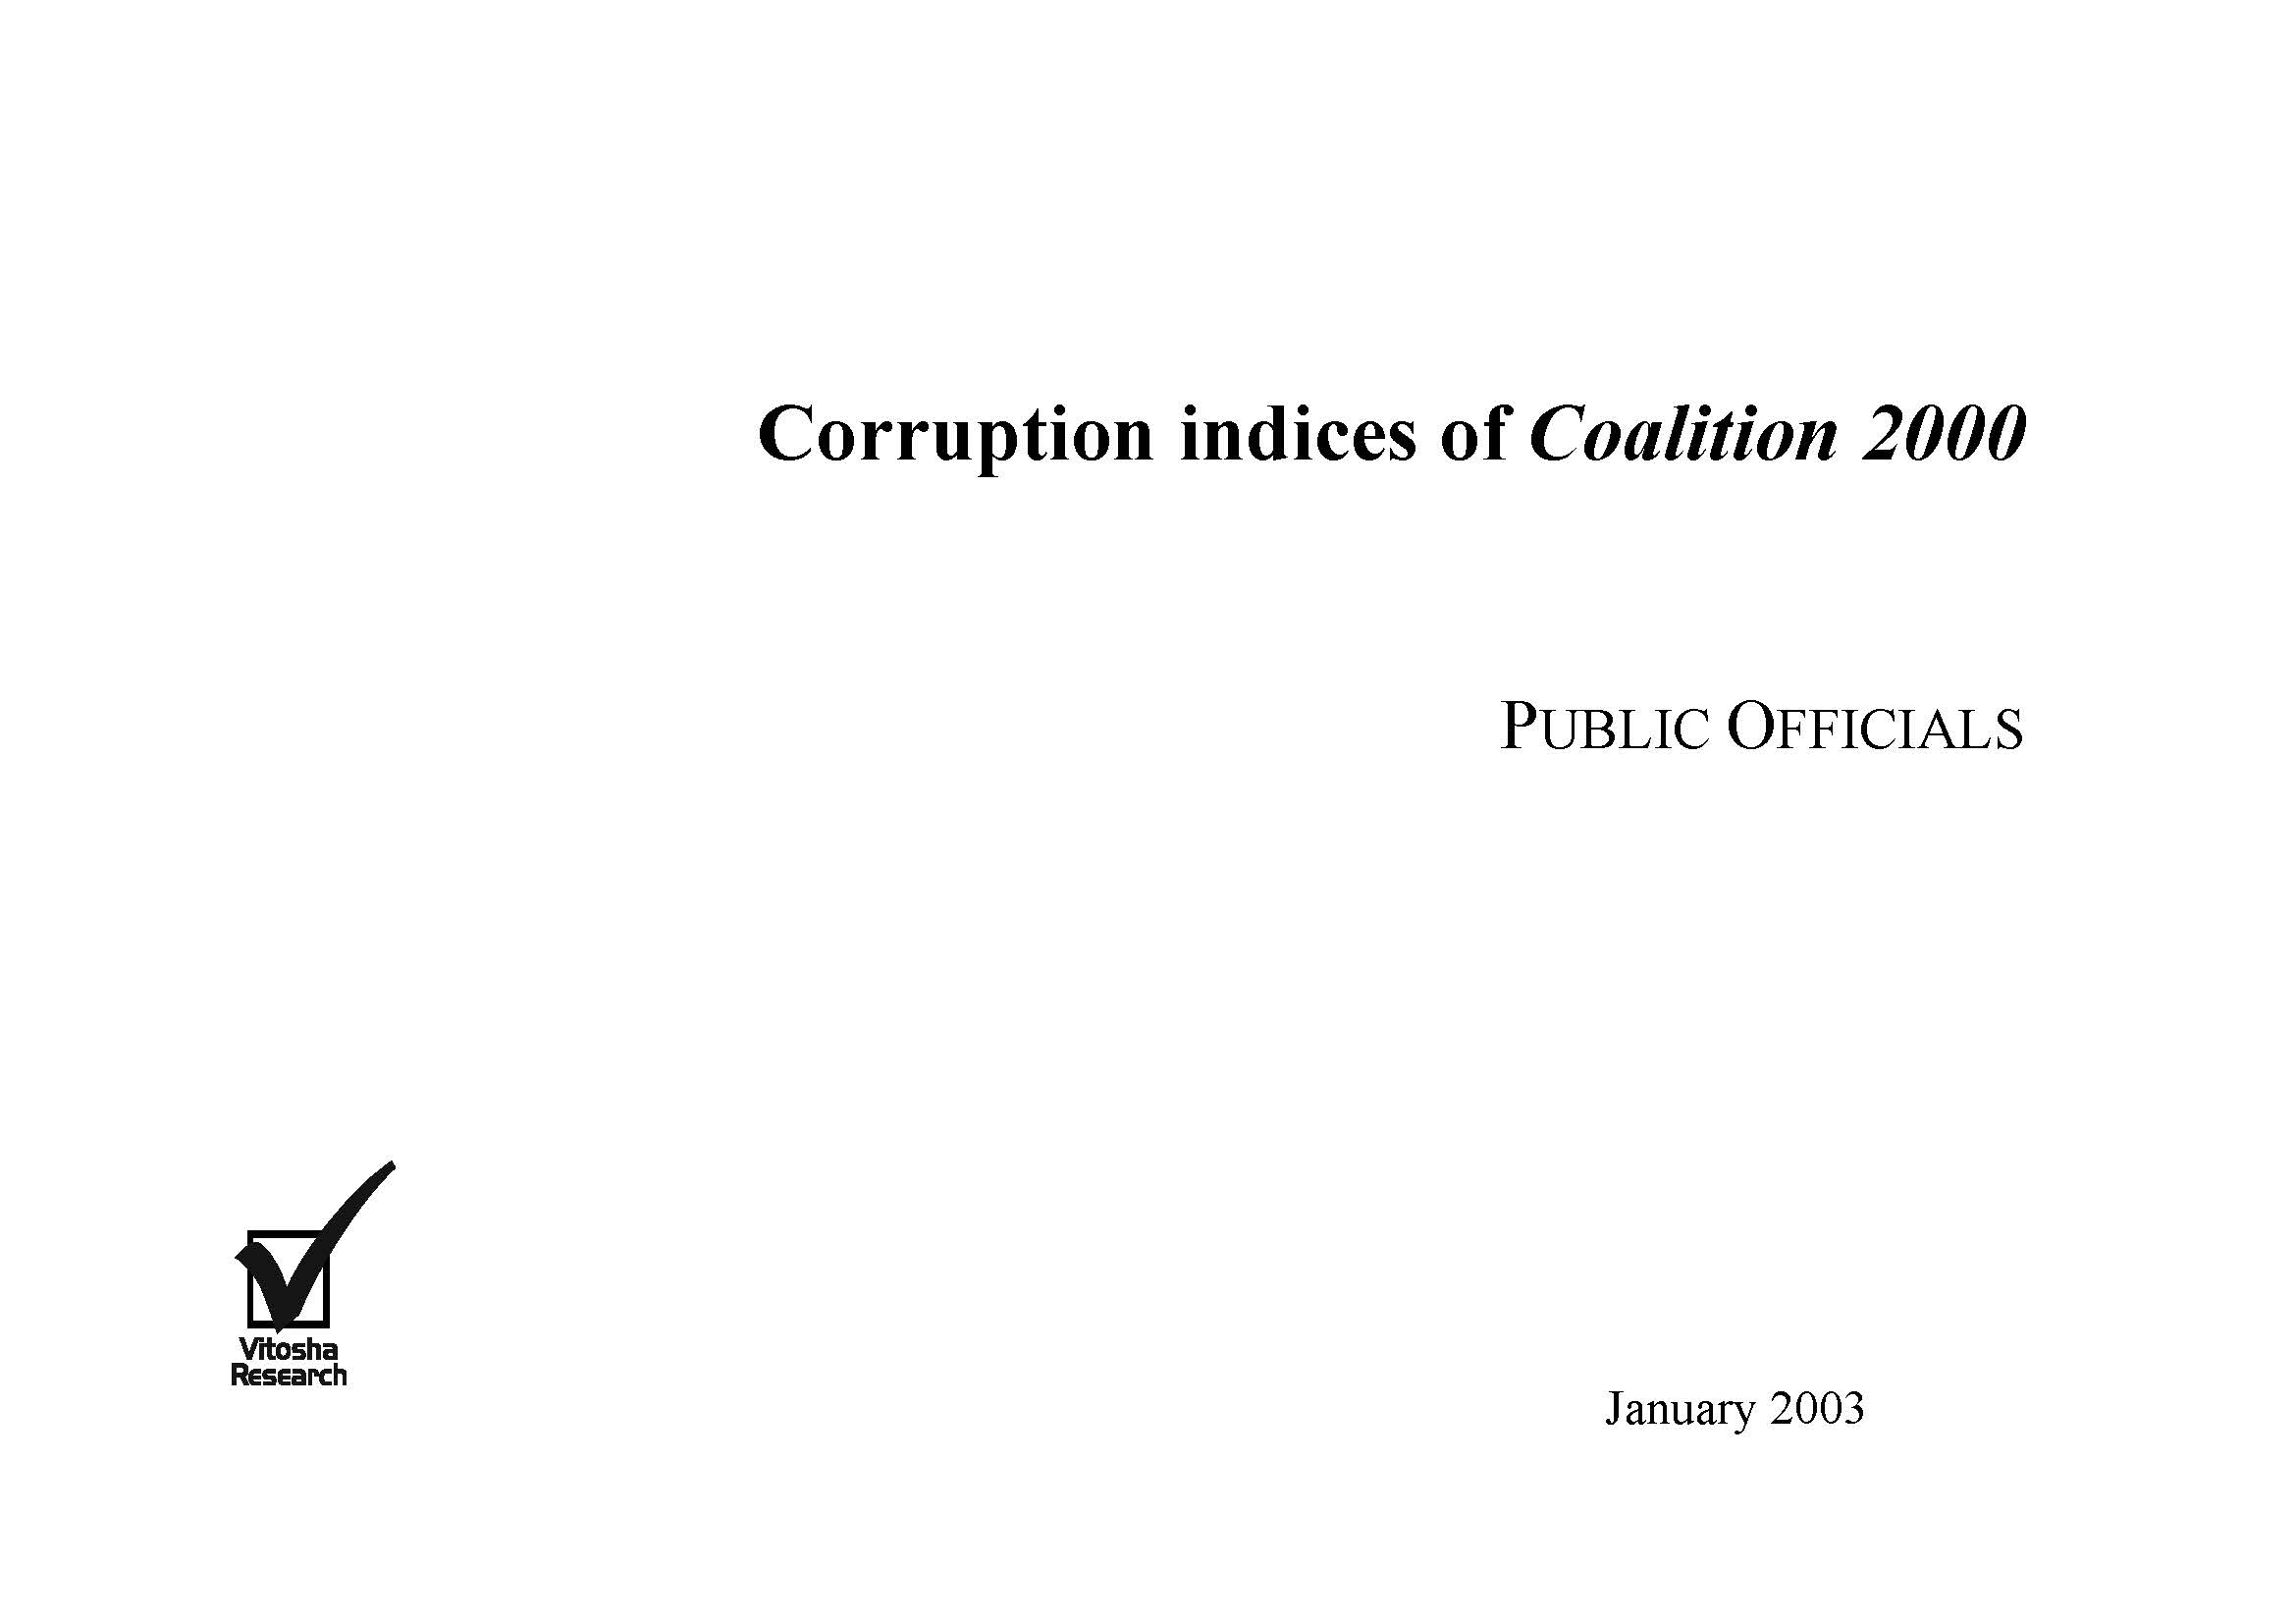 Corruption Indices of Coalition 2000, Public Sector Officials January 2003 Cover Image